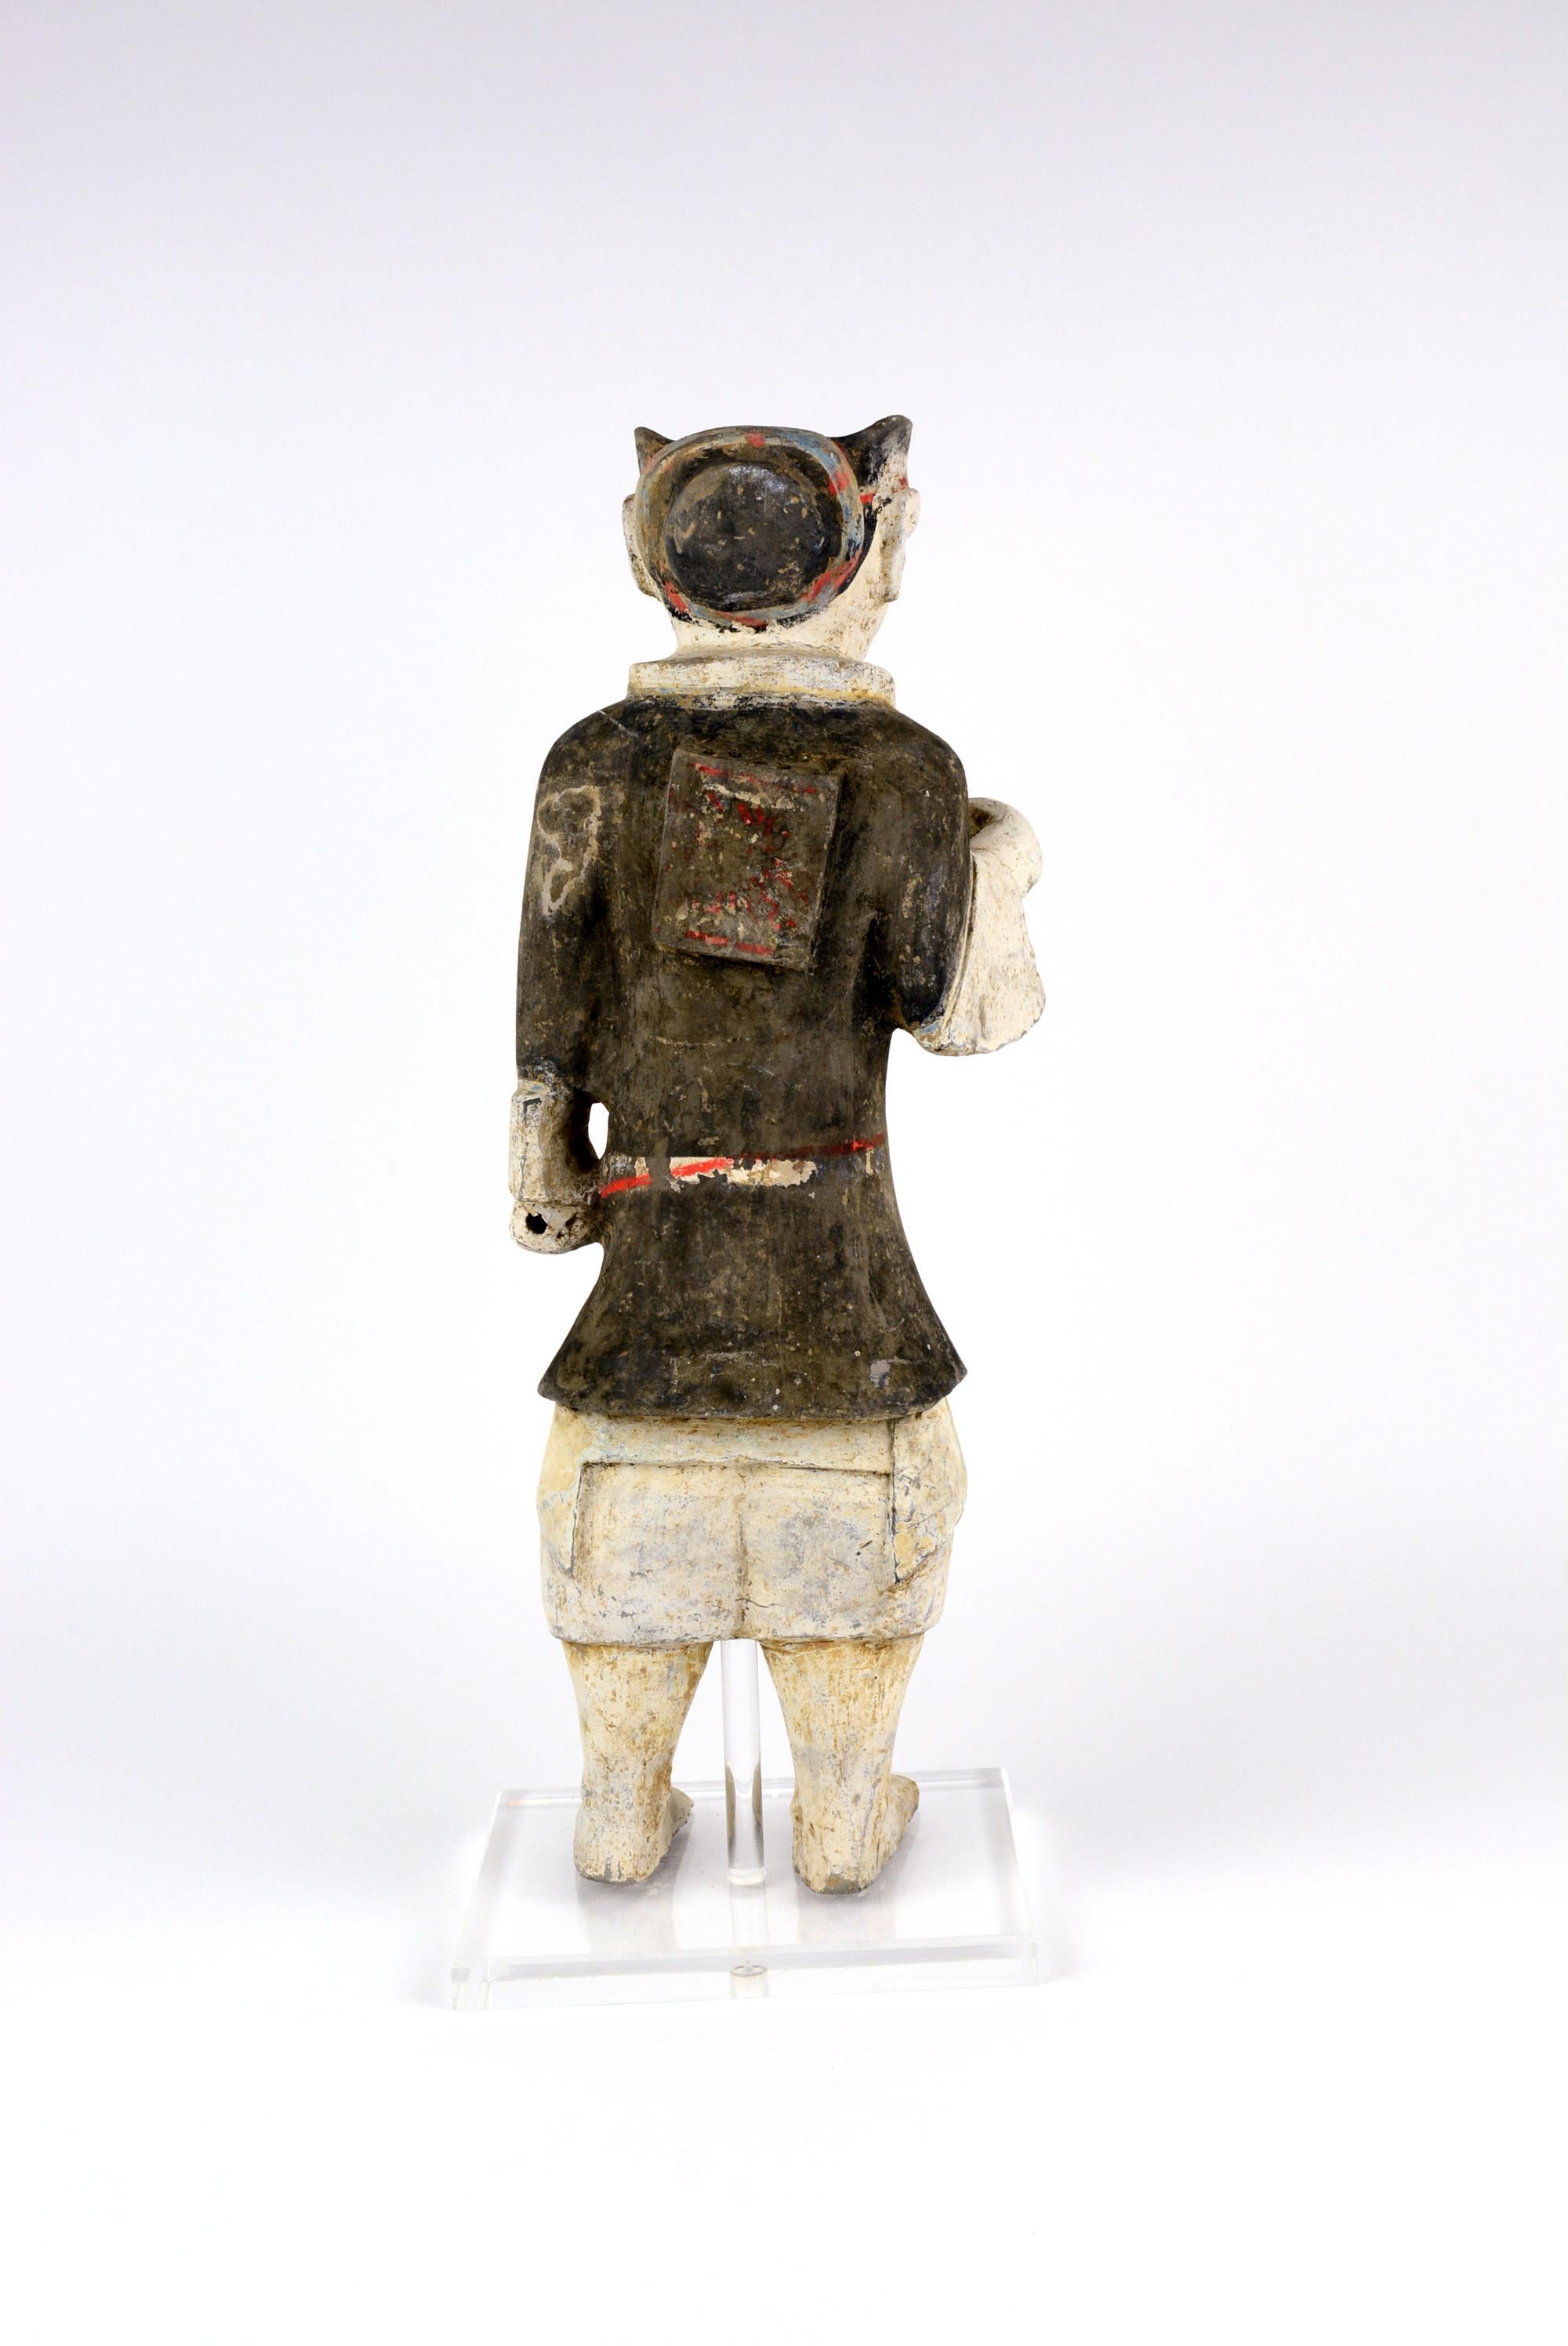 Han Warrior
Unlike Qin terracotta, Han Dynasty pottery figurine/ sculptures convey a more subdued and non-aggressive look. The figurines are clothed with bright pigments of red, blue, green and black. The proportion and expression are a good